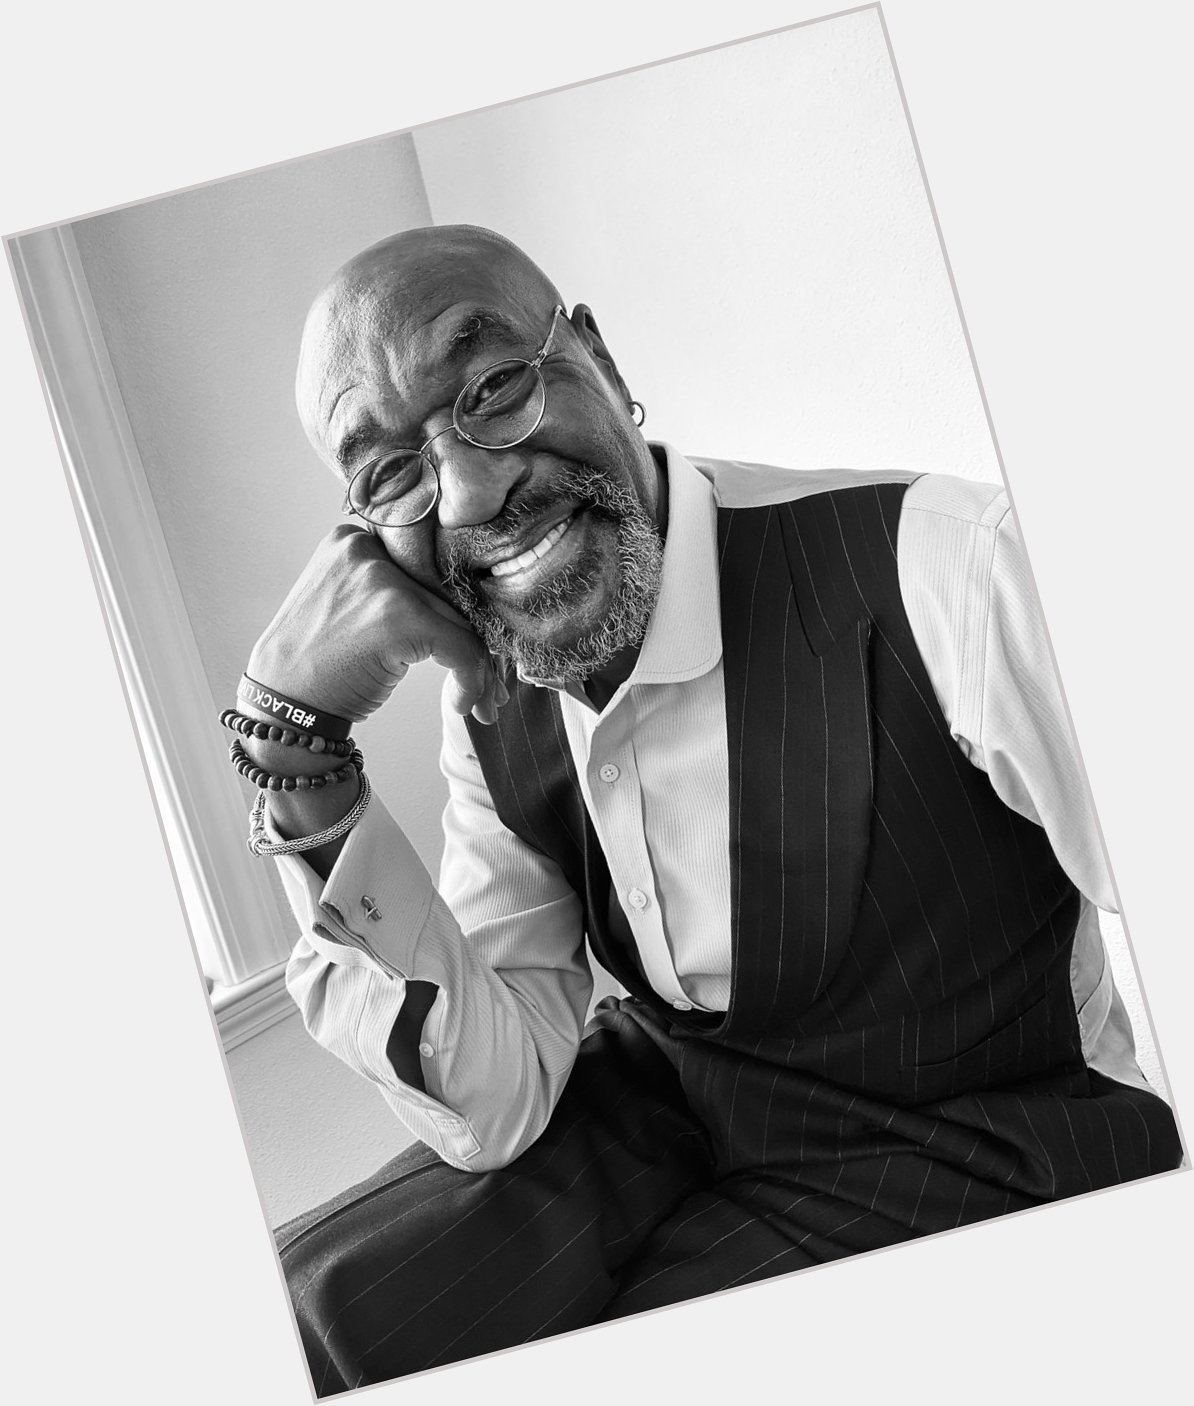 Happy Birthday to the Legend, Delroy Lindo.

Revisit his profile in 